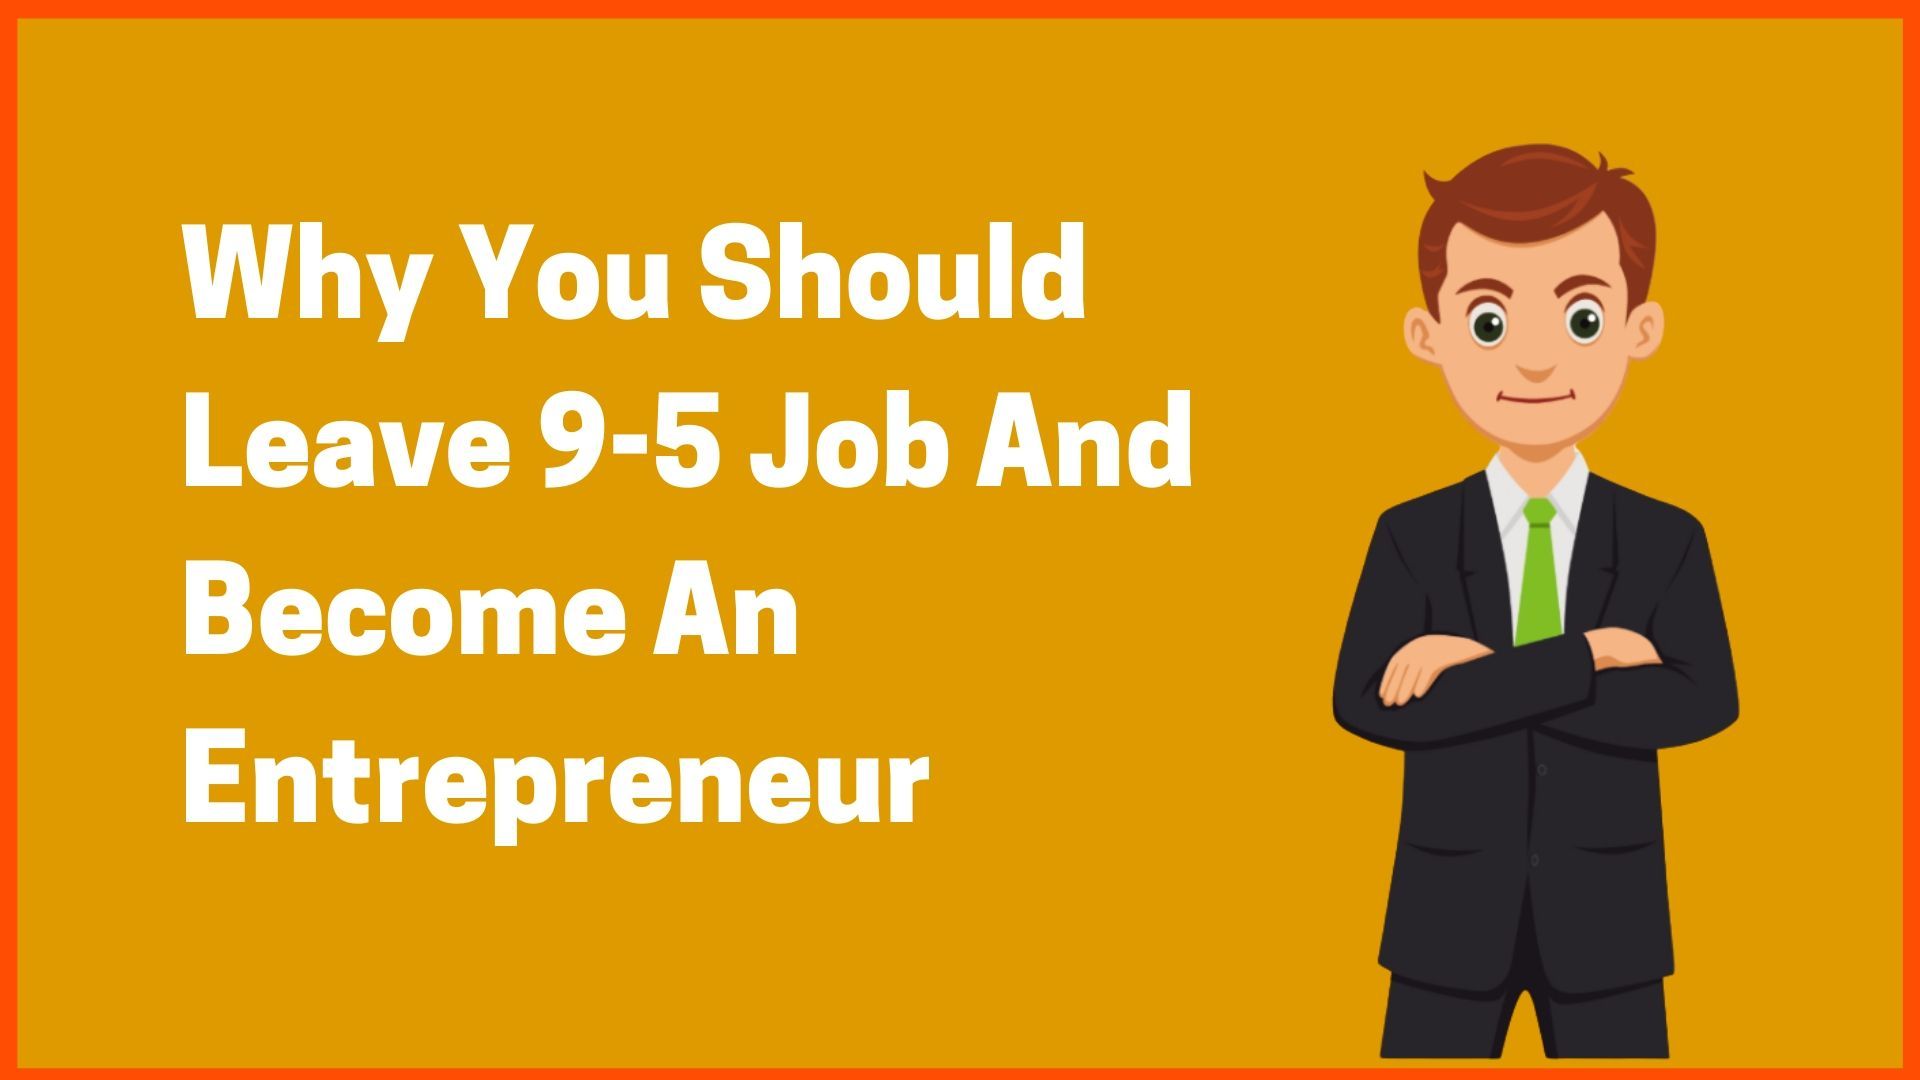 This Is Reasons- Why You Should Leave 9-5 Job And Become An Entrepreneur